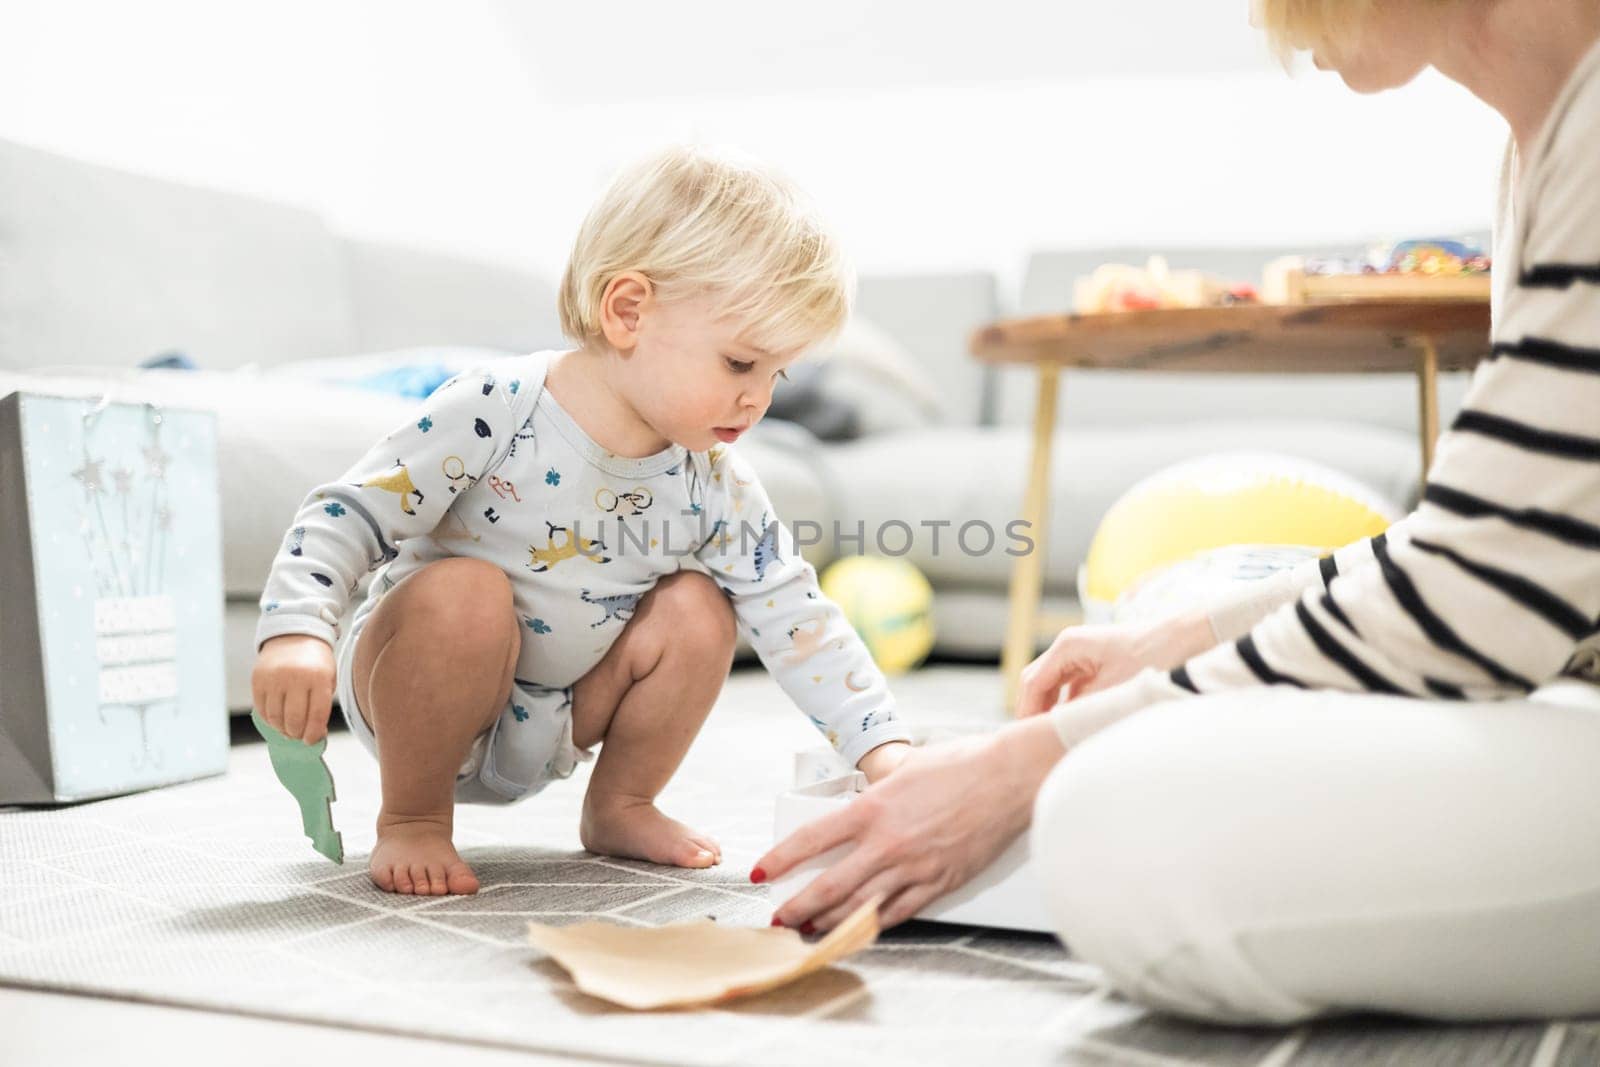 Parents playing games with child. Little toddler doing puzzle. Infant baby boy learns to solve problems and develops cognitive skills. Child development concept.